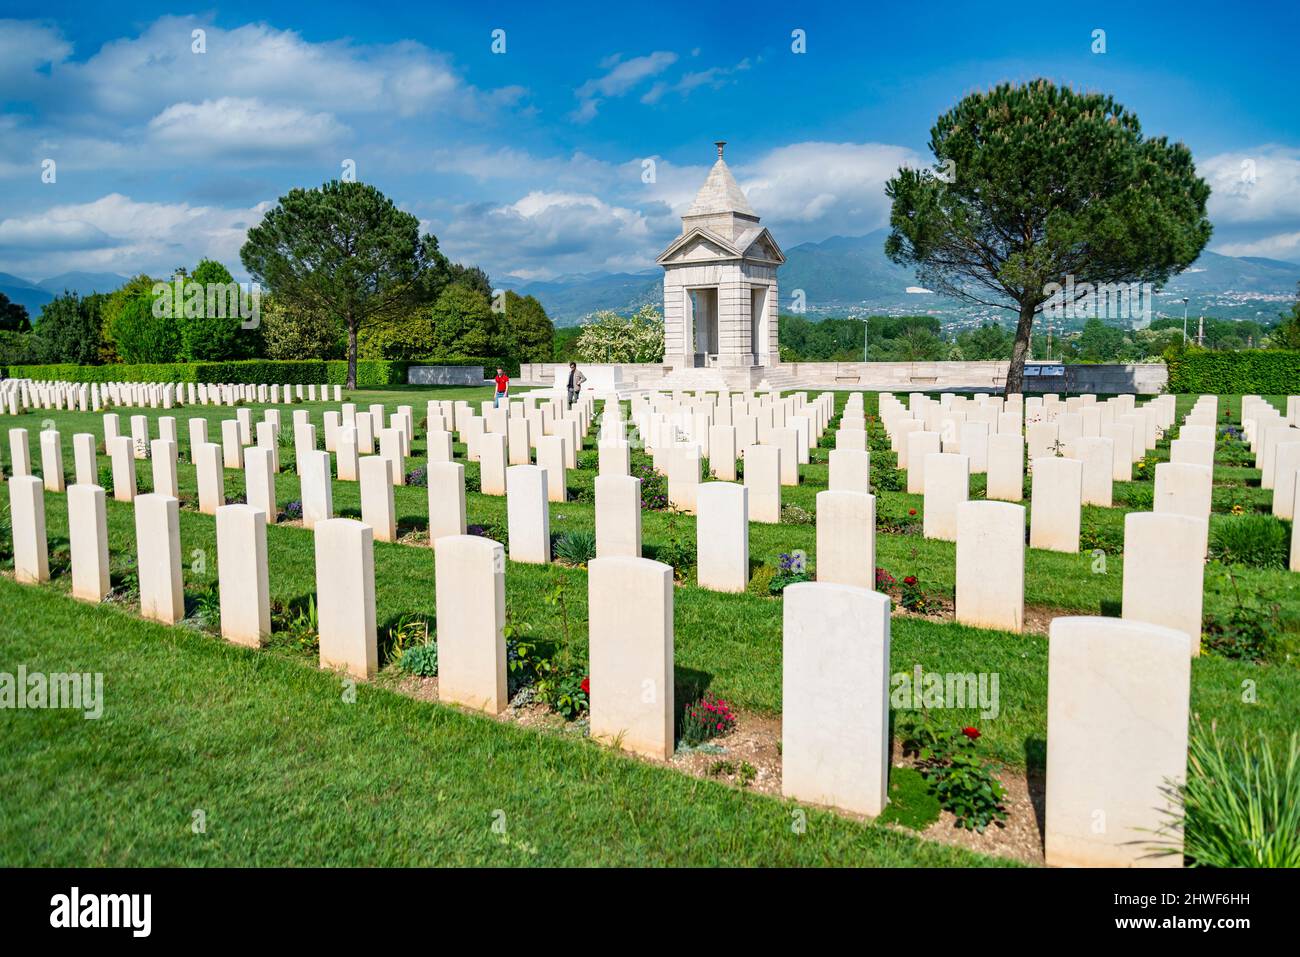 War memorial, Commonwealth Cemetery of Cassino in Italy of the Second World War. Stock Photo